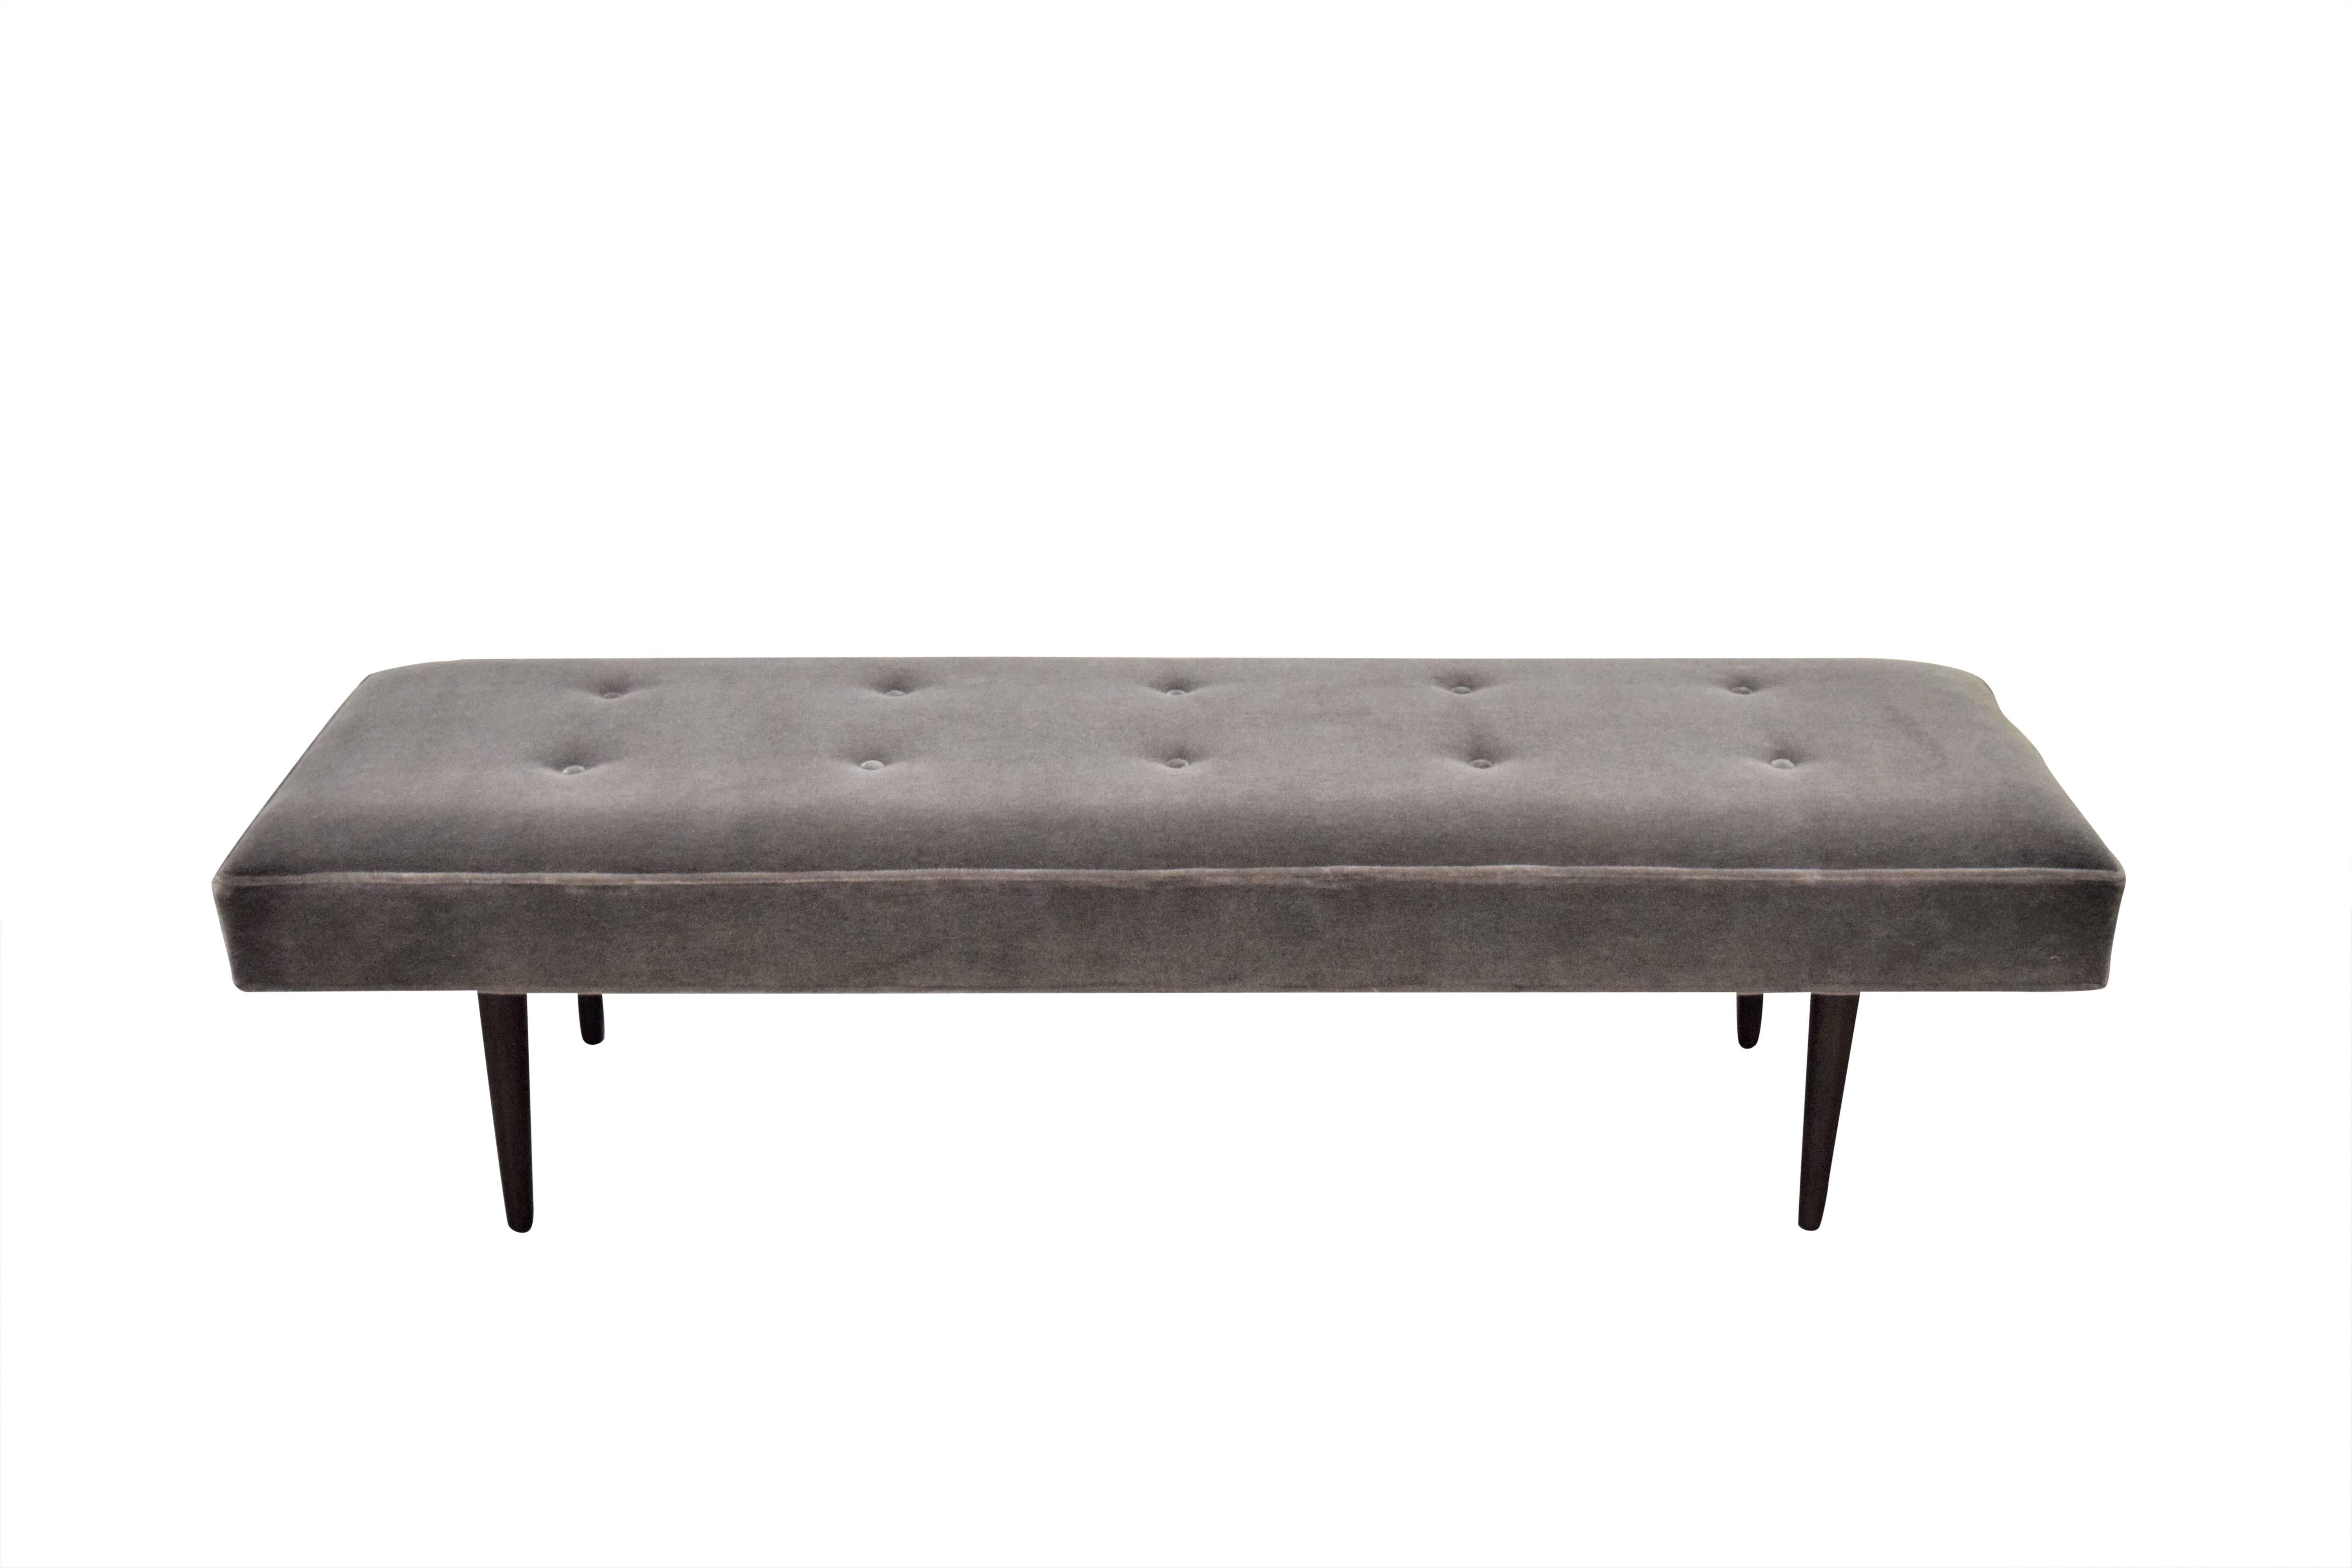 Milo Baughman for Thayer Coggin tufted bench mohair. Bench has been fully restored and upholstered in Mohair and legs in a dark walnut finish.